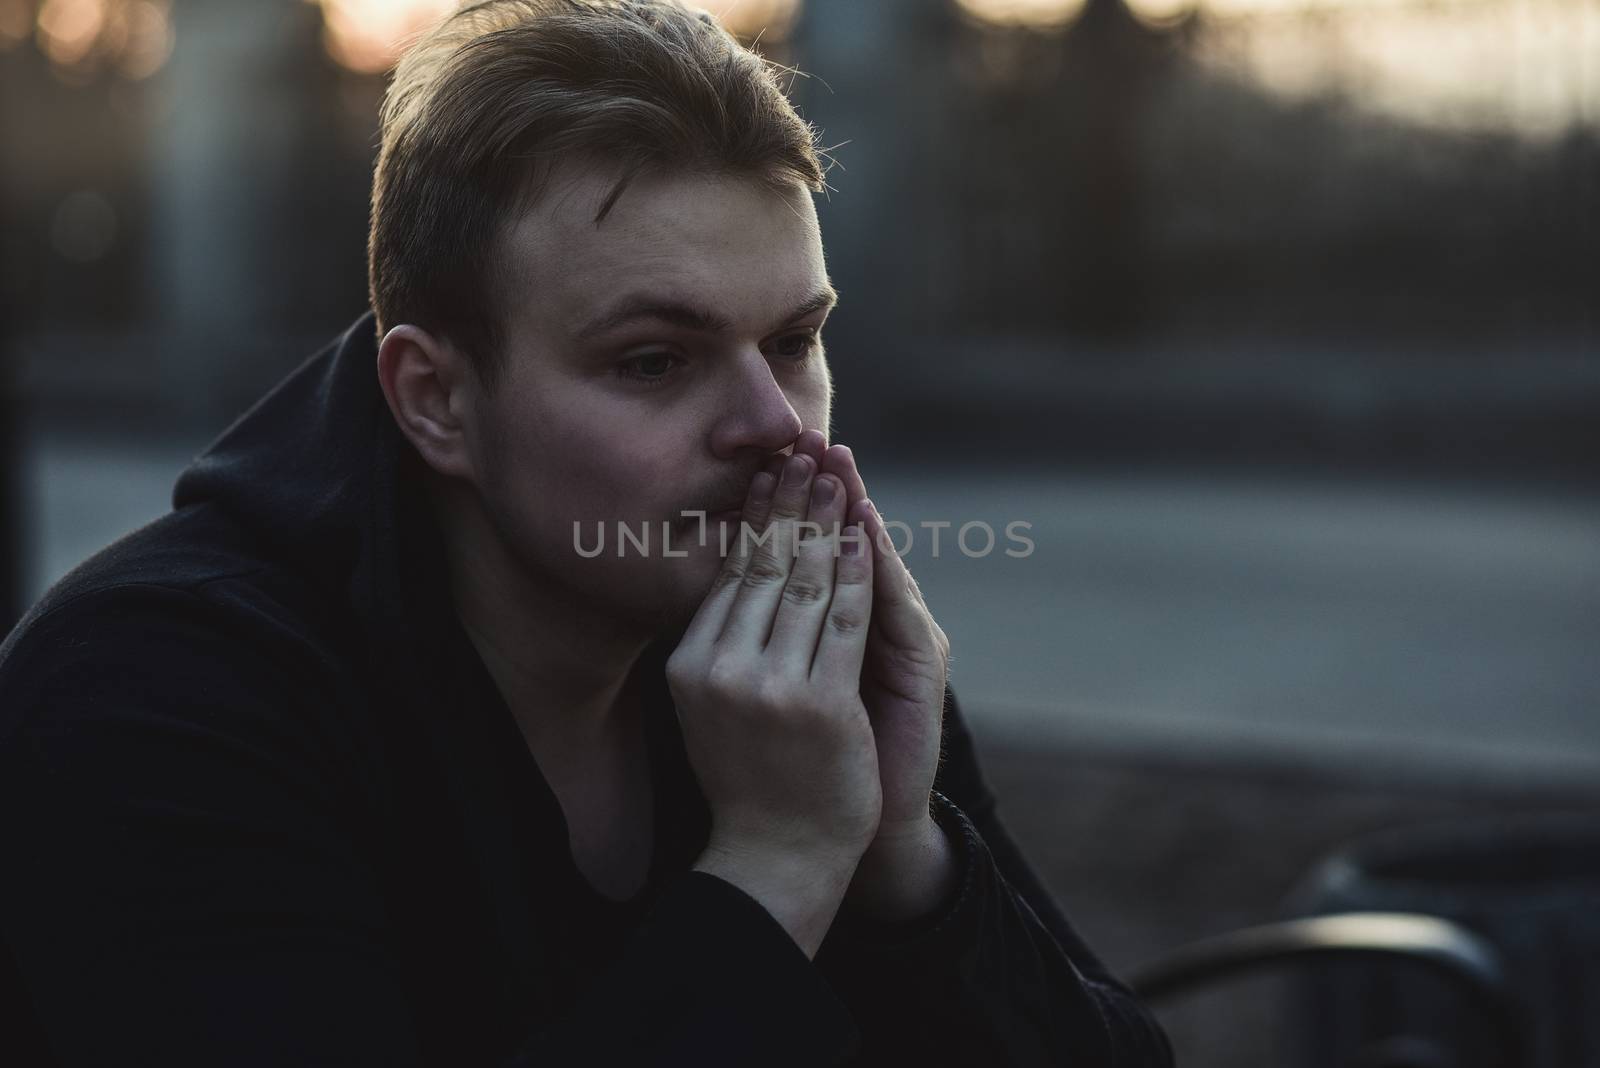 Lonely depressed man sits outside in his thoughts by Nickstock